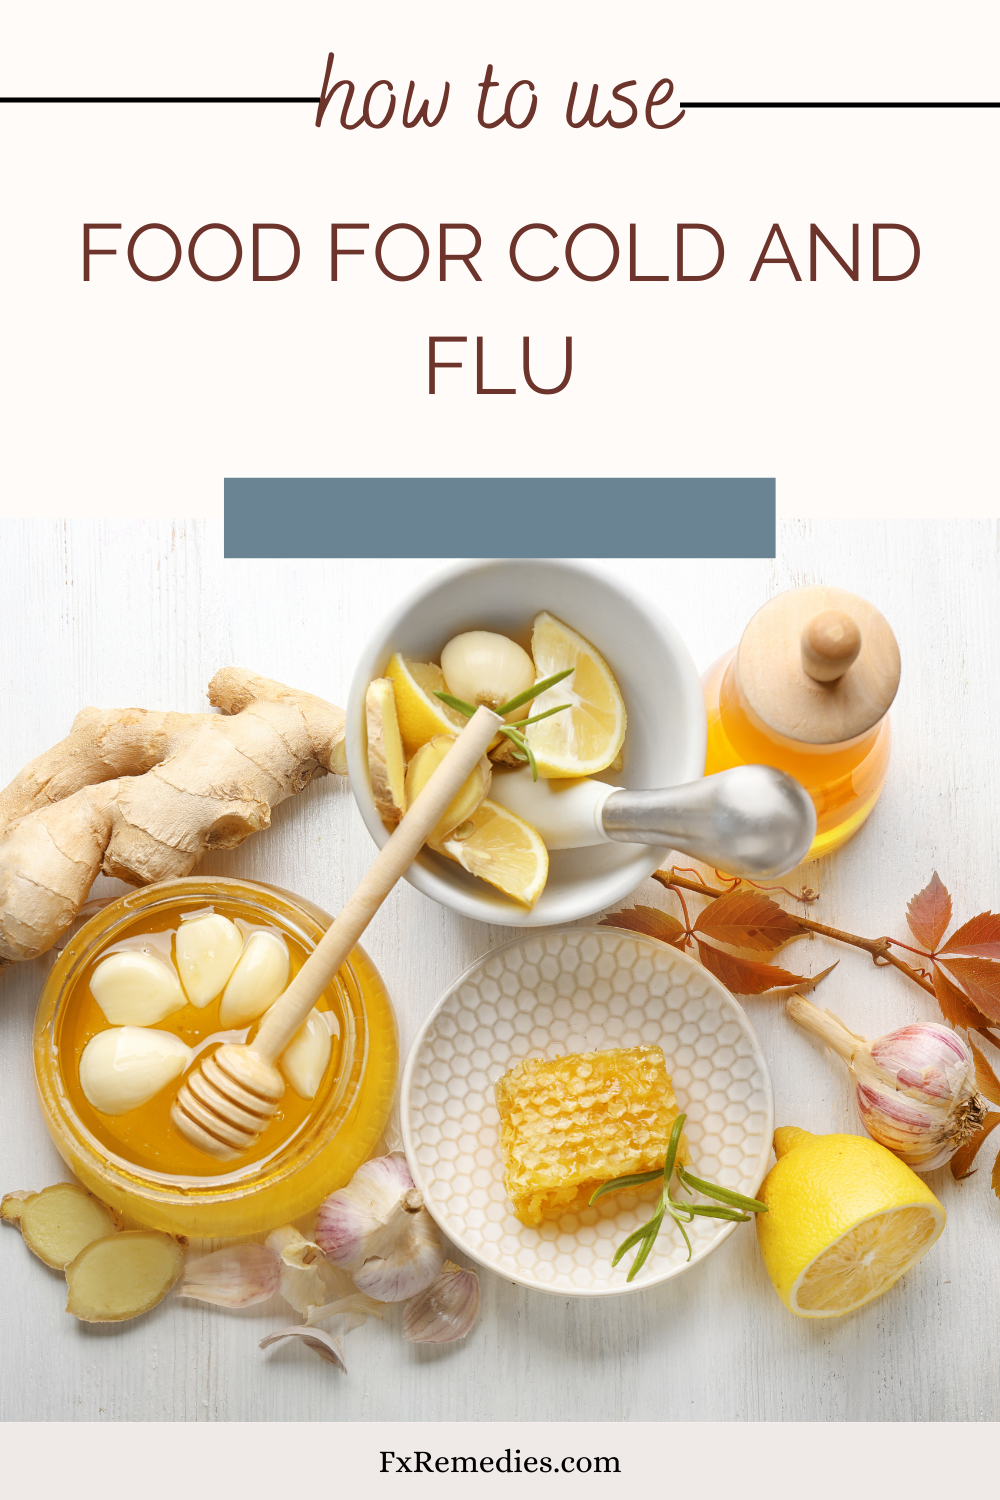 Food for cold and flu pinterest pin